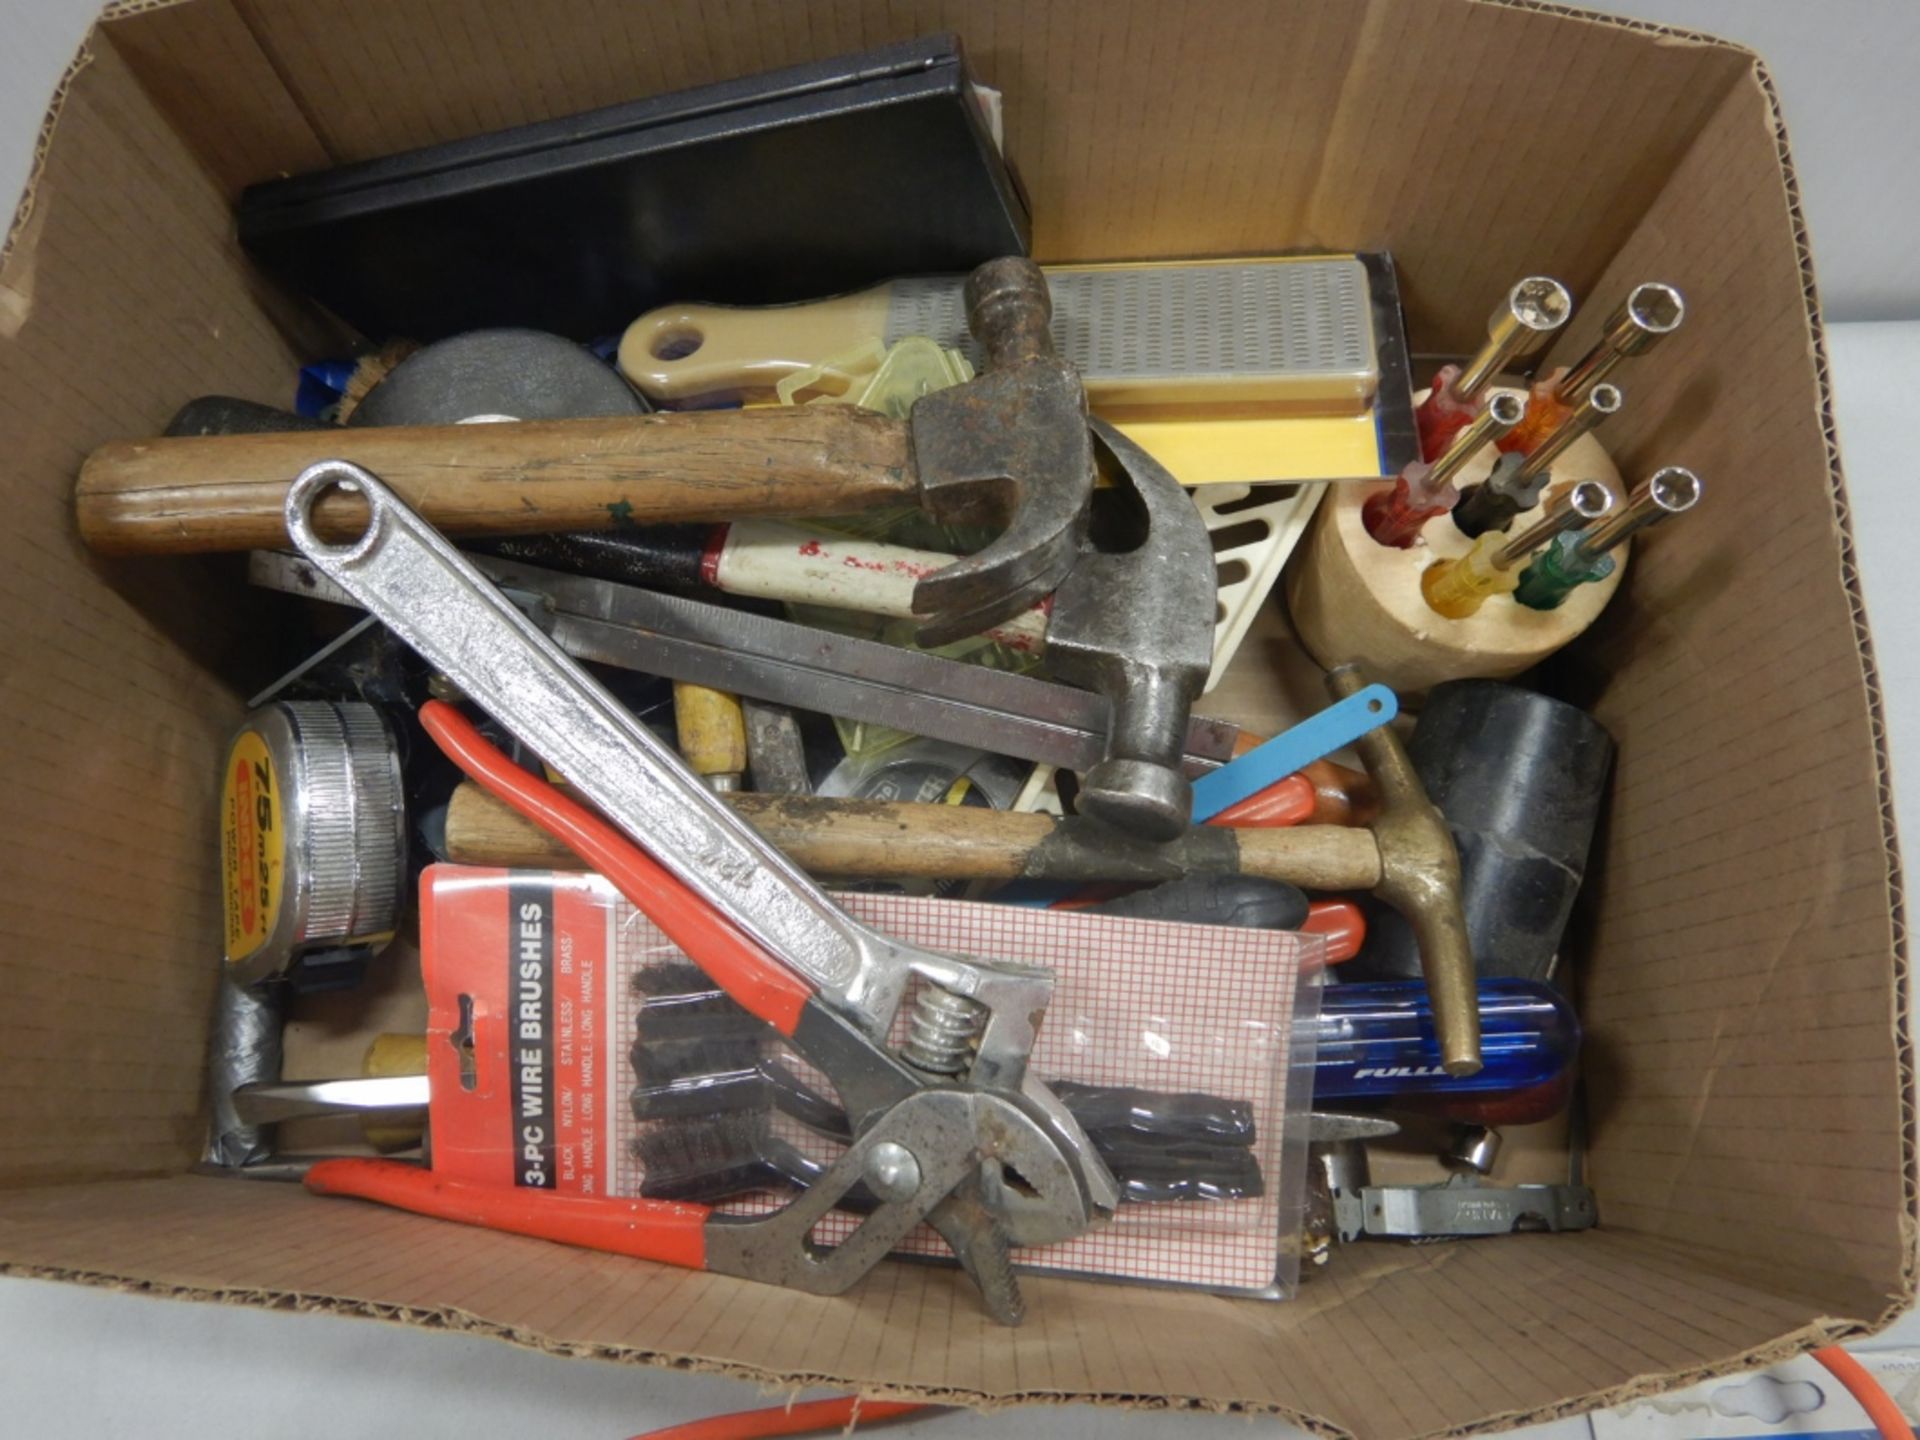 L/O ASSORTED HAND TOOLS, HACK SAW, TROUBLE LIGHT, HAMMERS, ETC. - Image 3 of 3